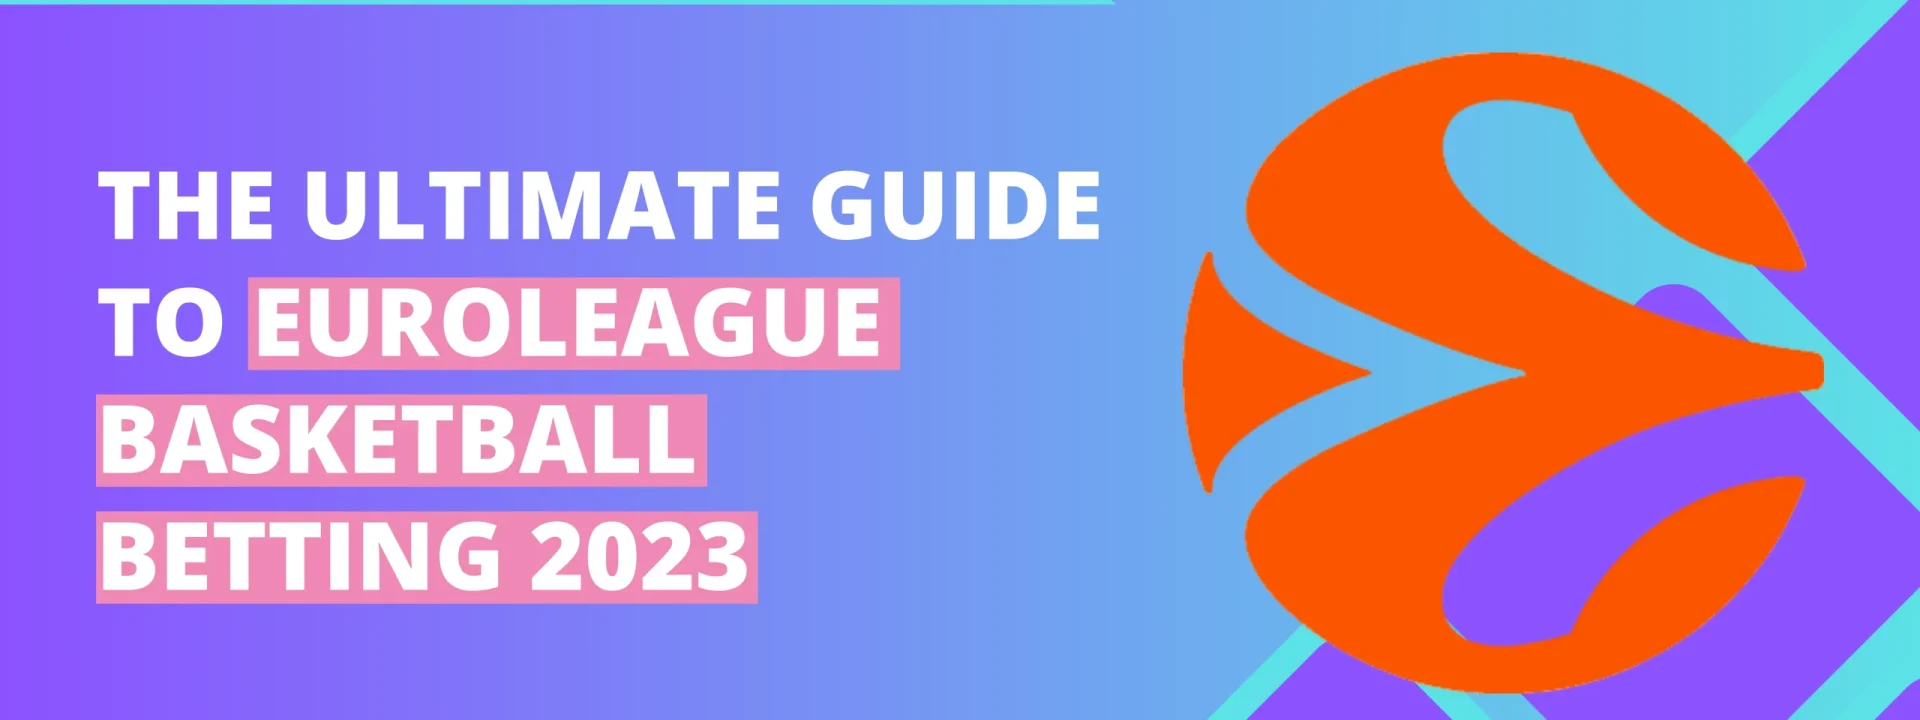 The Ultimate Guide to Euroleague Basketball Betting 2023